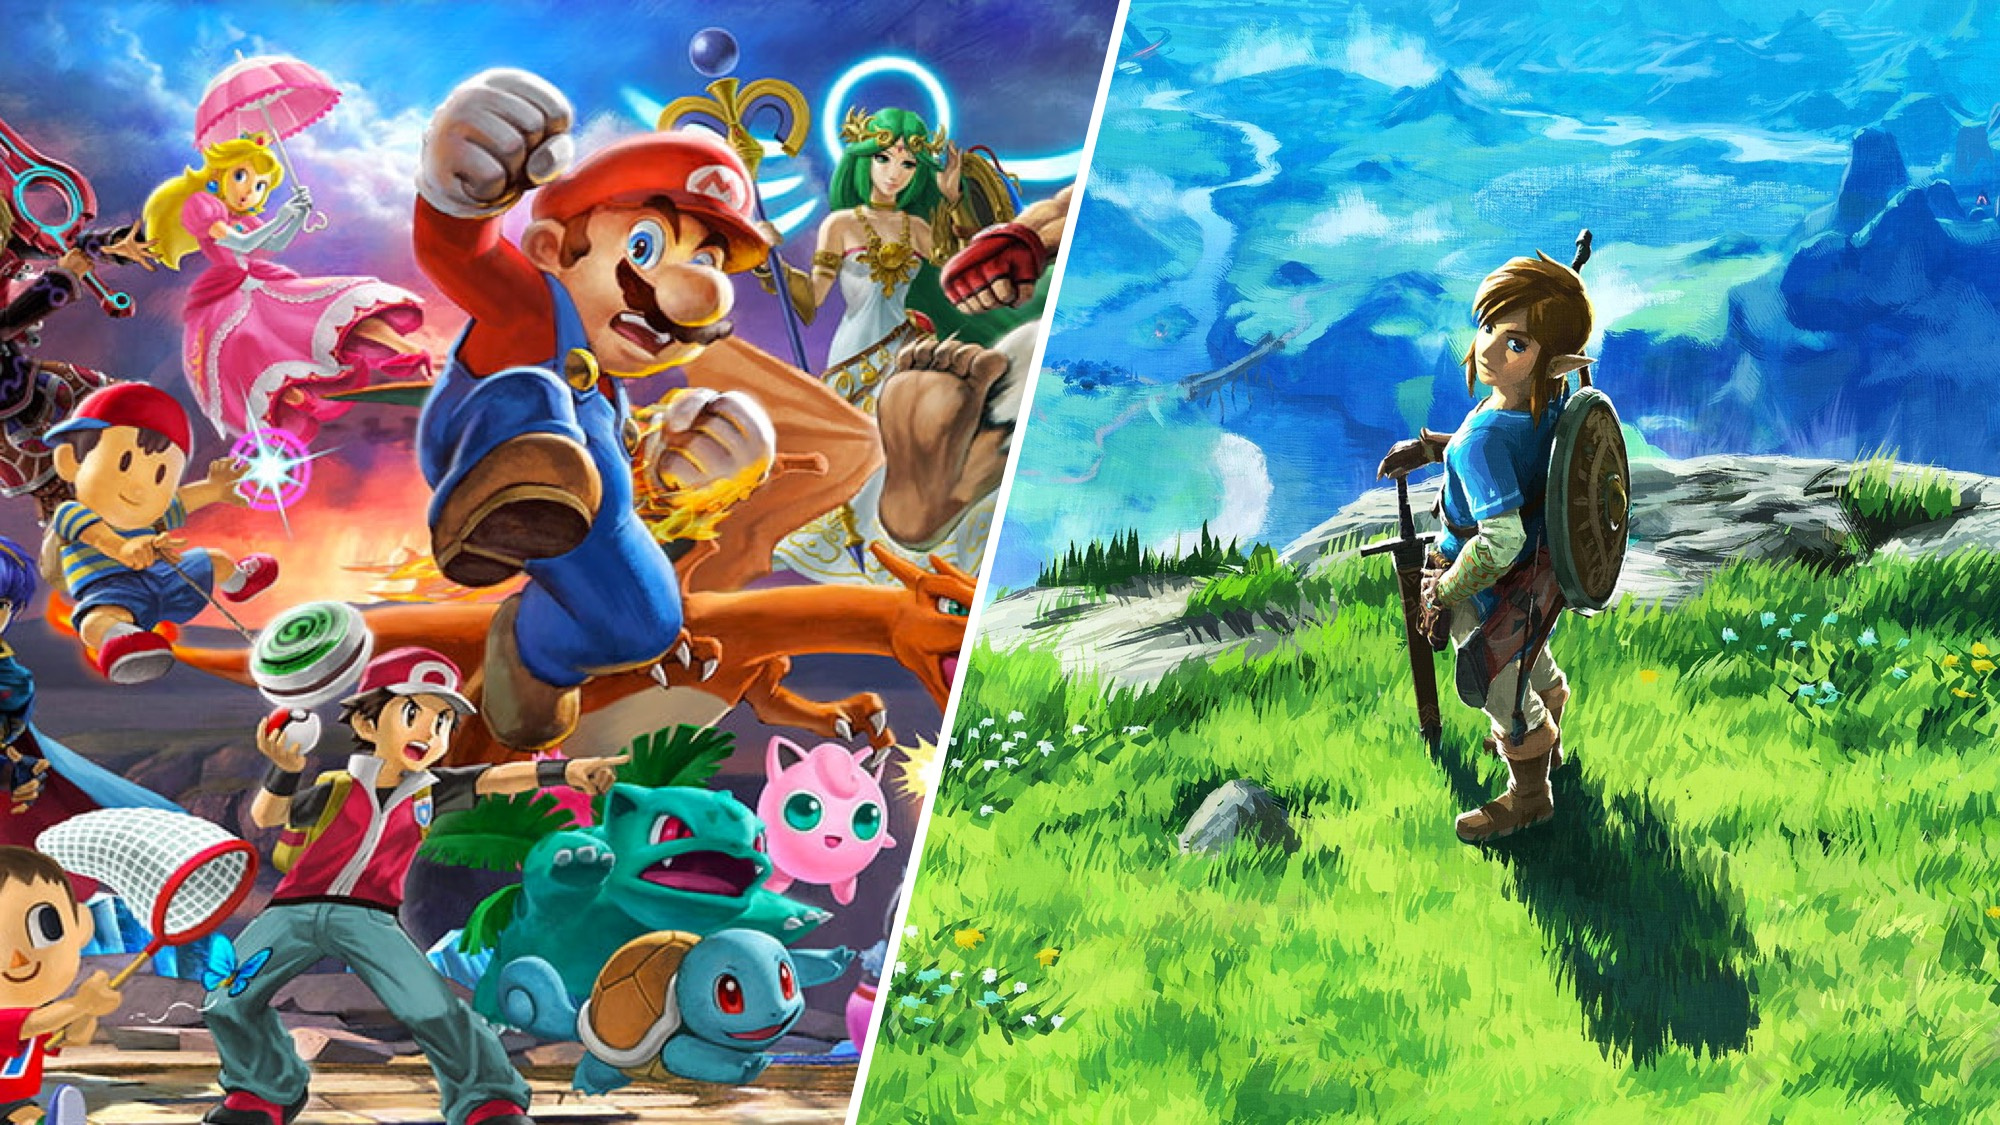 Deals: Amazon UK Gets Into The Black Friday Spirit With Tasty Nintendo Switch Game Bundles ...